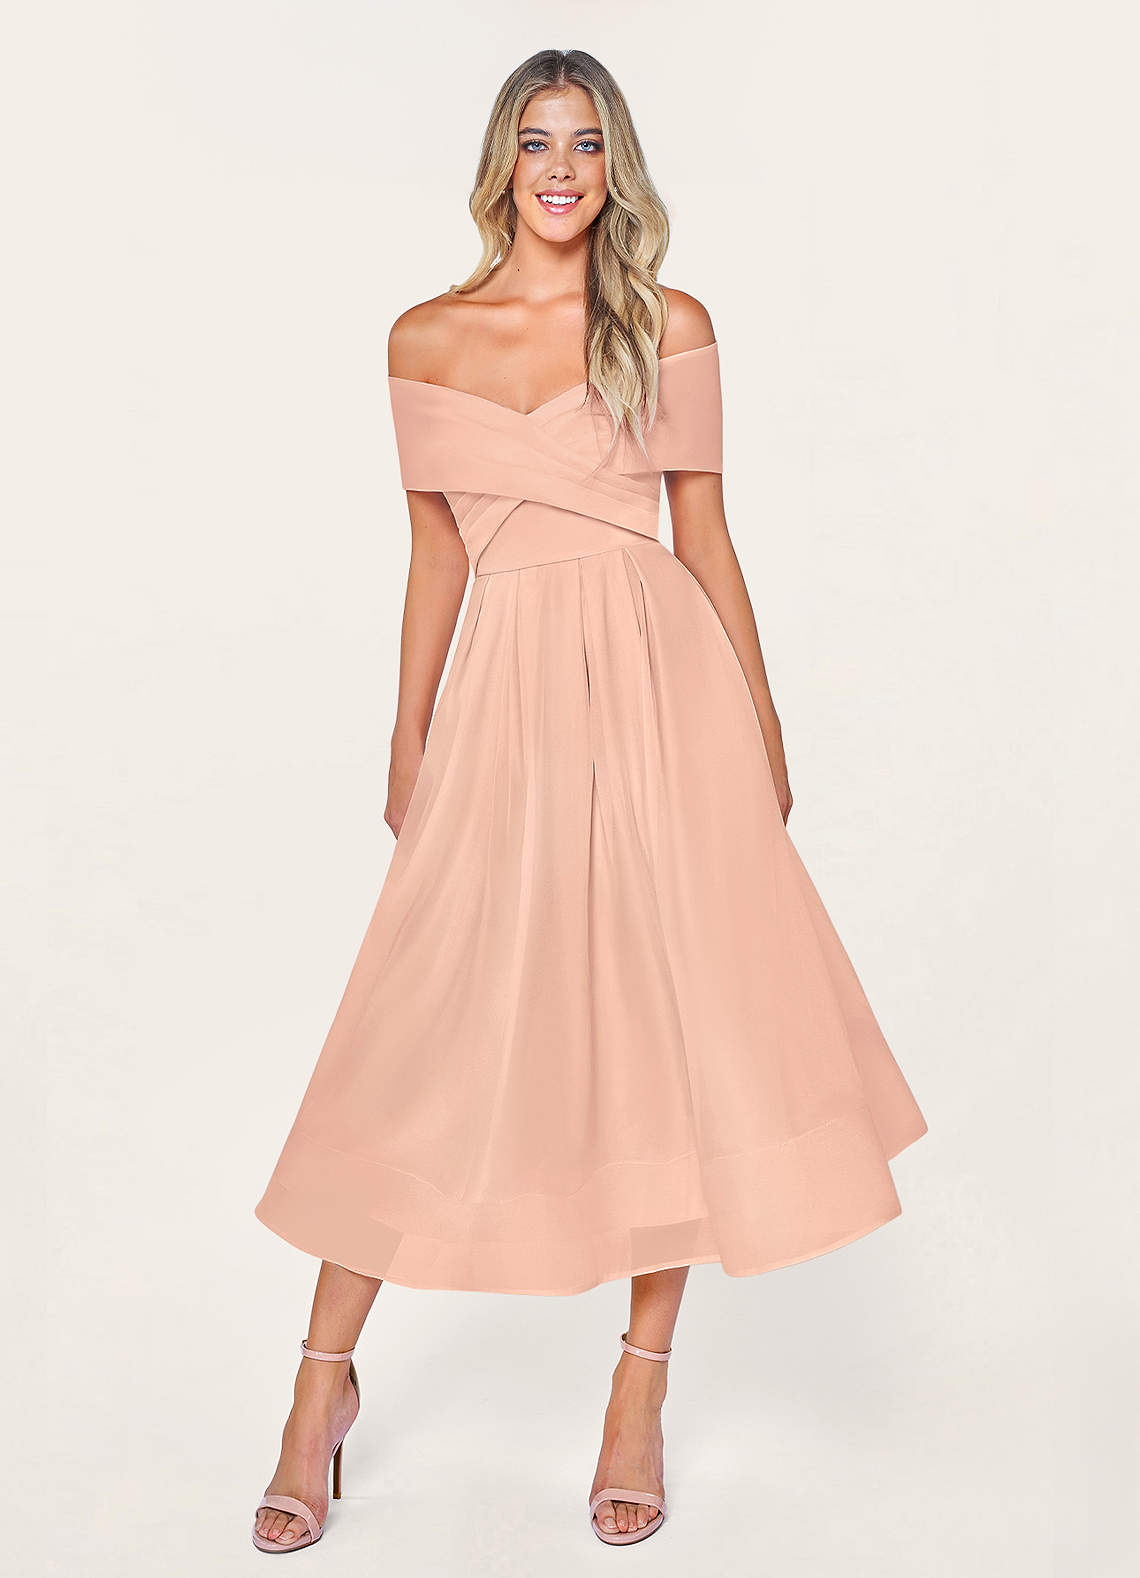 Dear To My Heart Blushing Pink Off-The-Shoulder Midi Dress image1